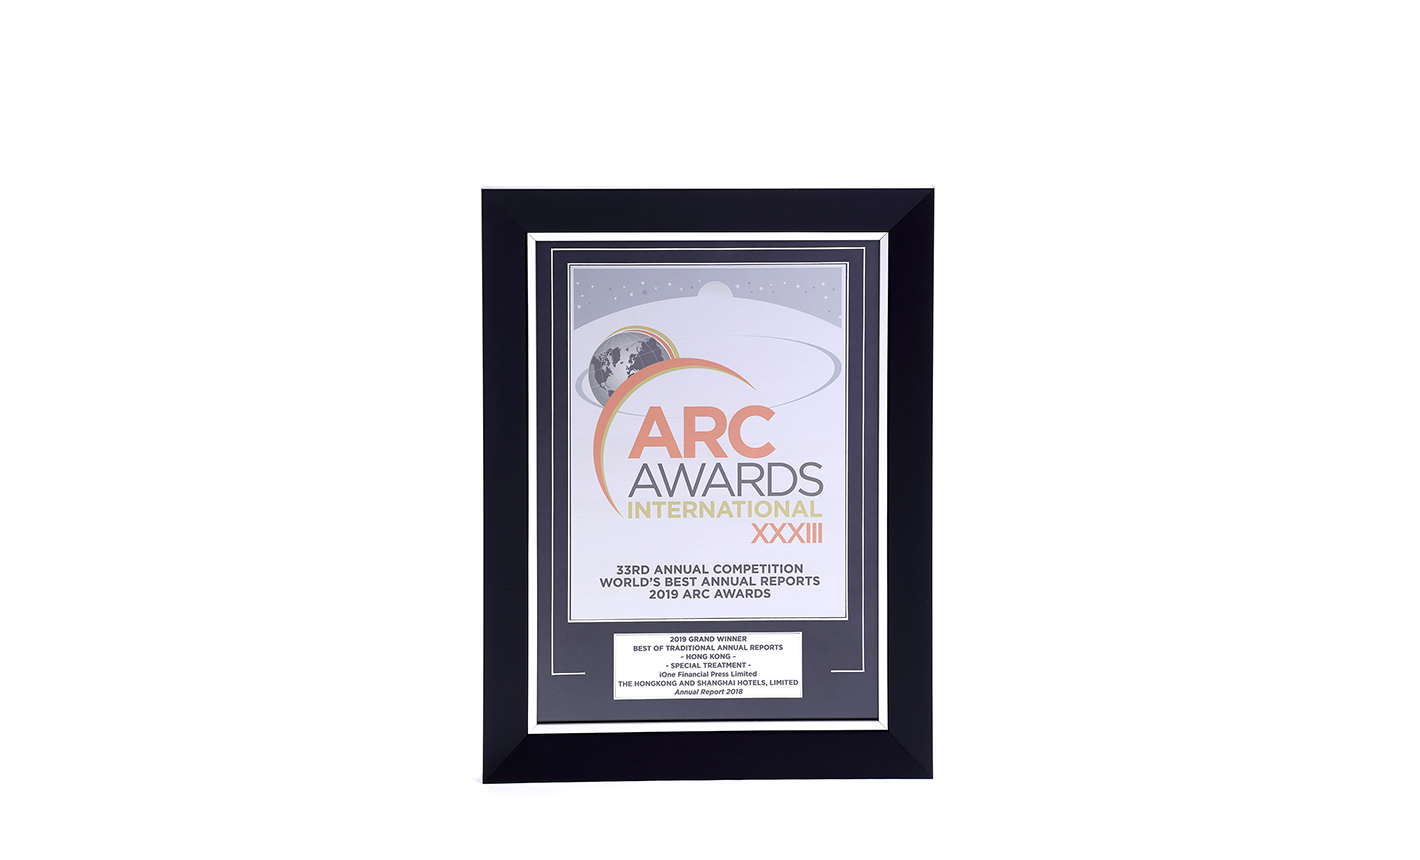 2019 ARC awards traditional annual reports